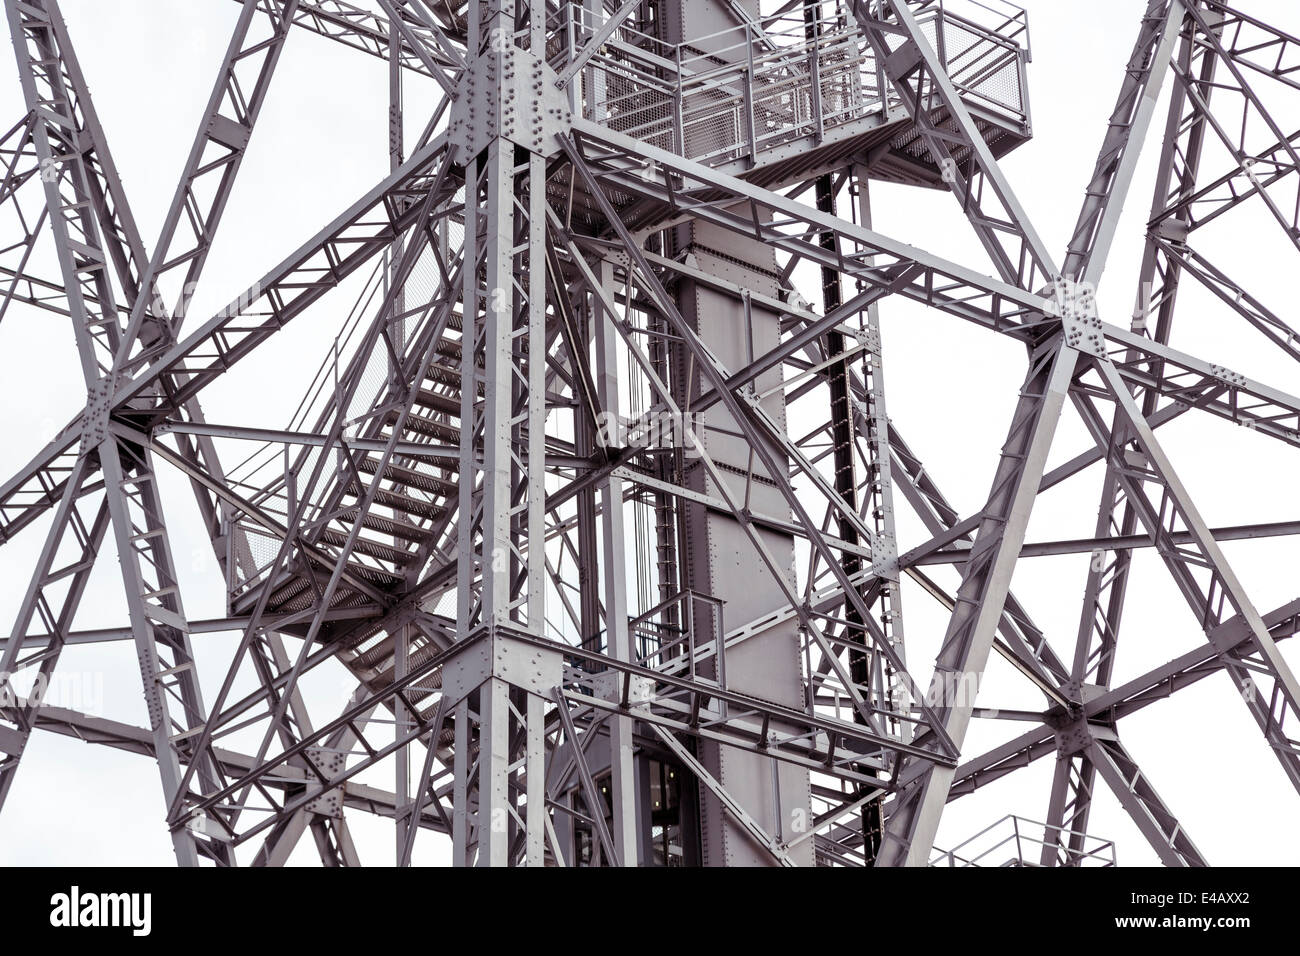 detail view of the funkturm, berlin germany. Stock Photo